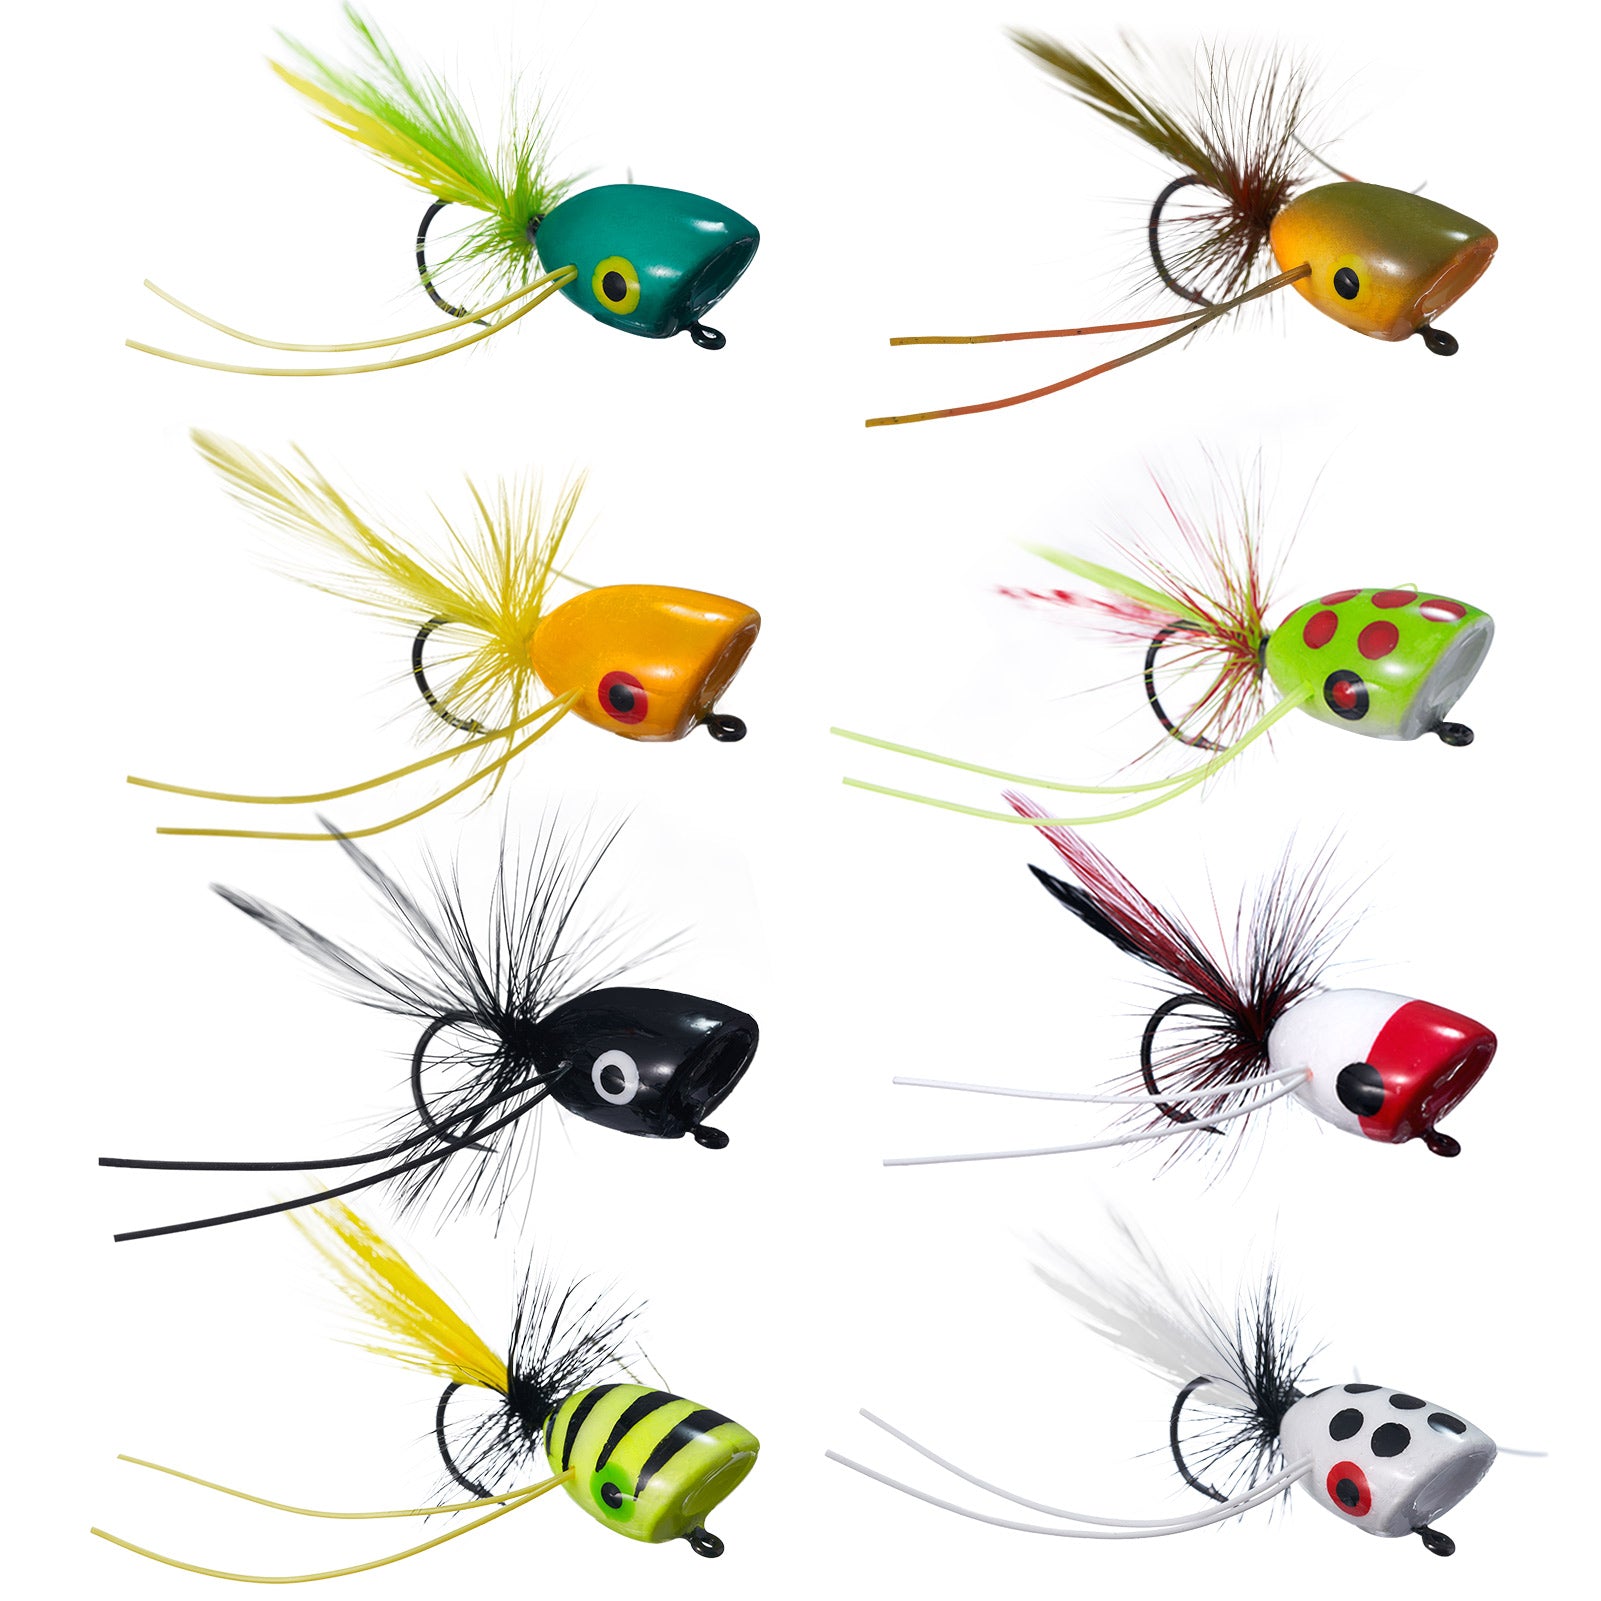 Fly Fishing Poppers, 12pcs Bass Popper for Fly Fishing Topwater Bass  Panfish Flies Trout Salmon Bluegill Poppers Flies Bugs Lures Colorful  Fishing